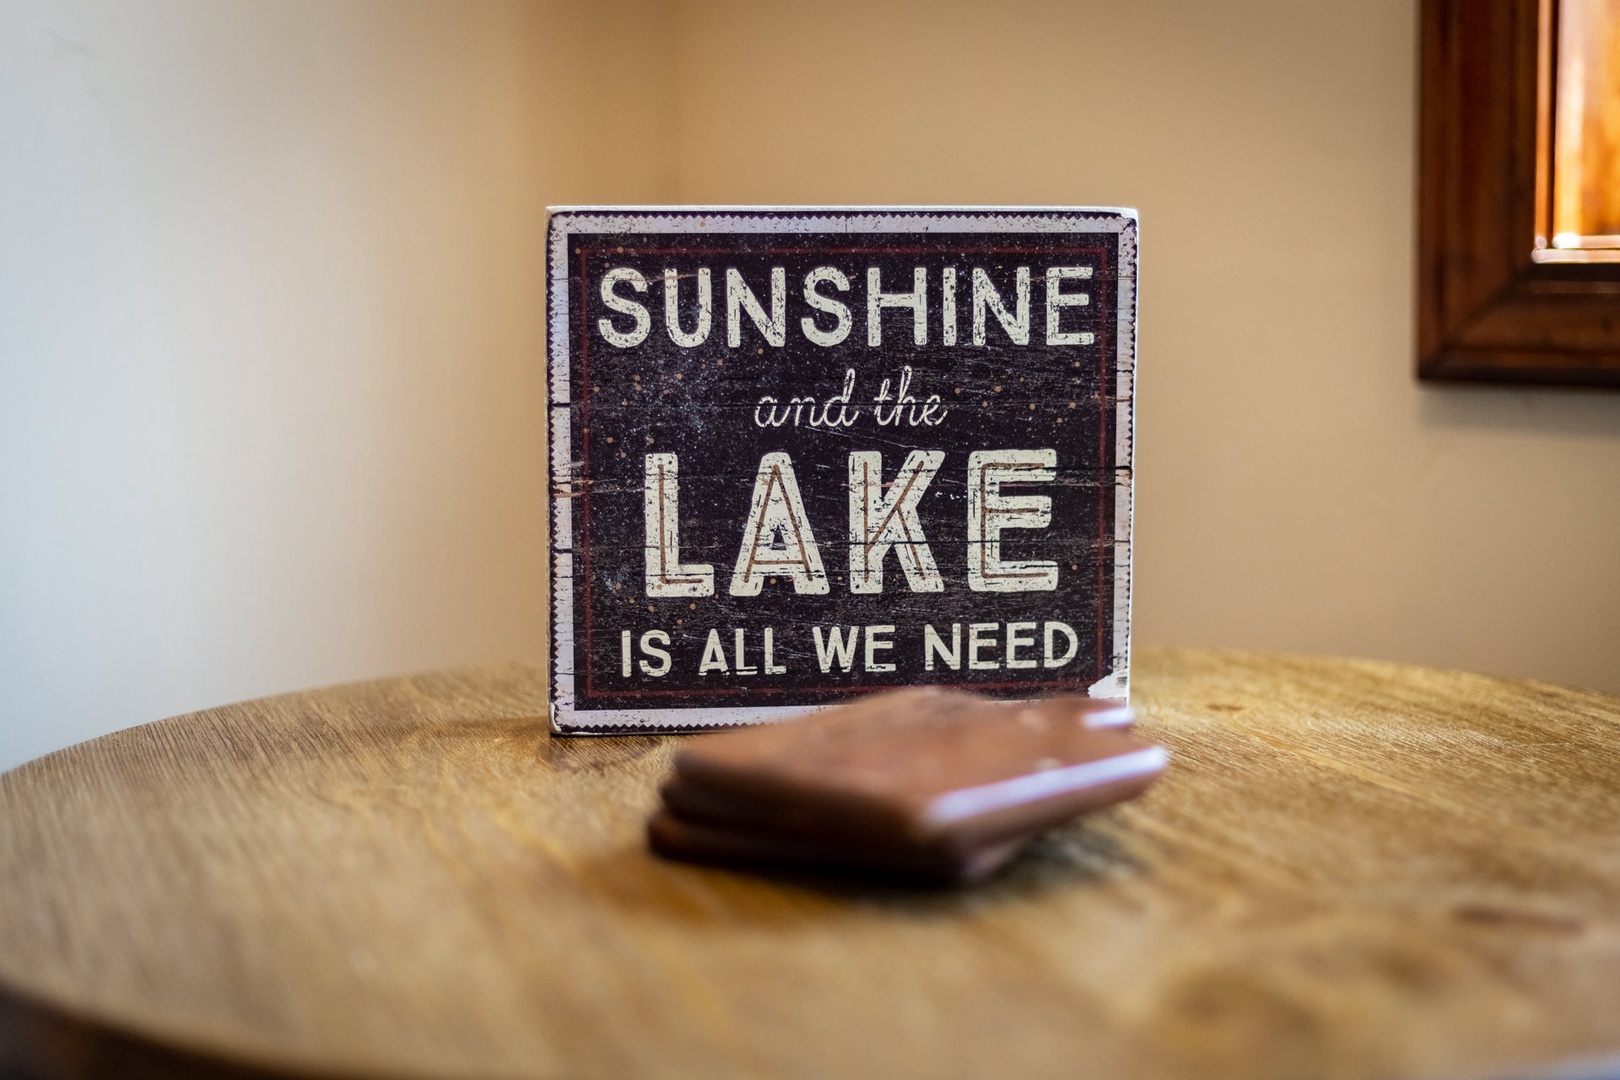 "Sunshine and the lake is all we need"